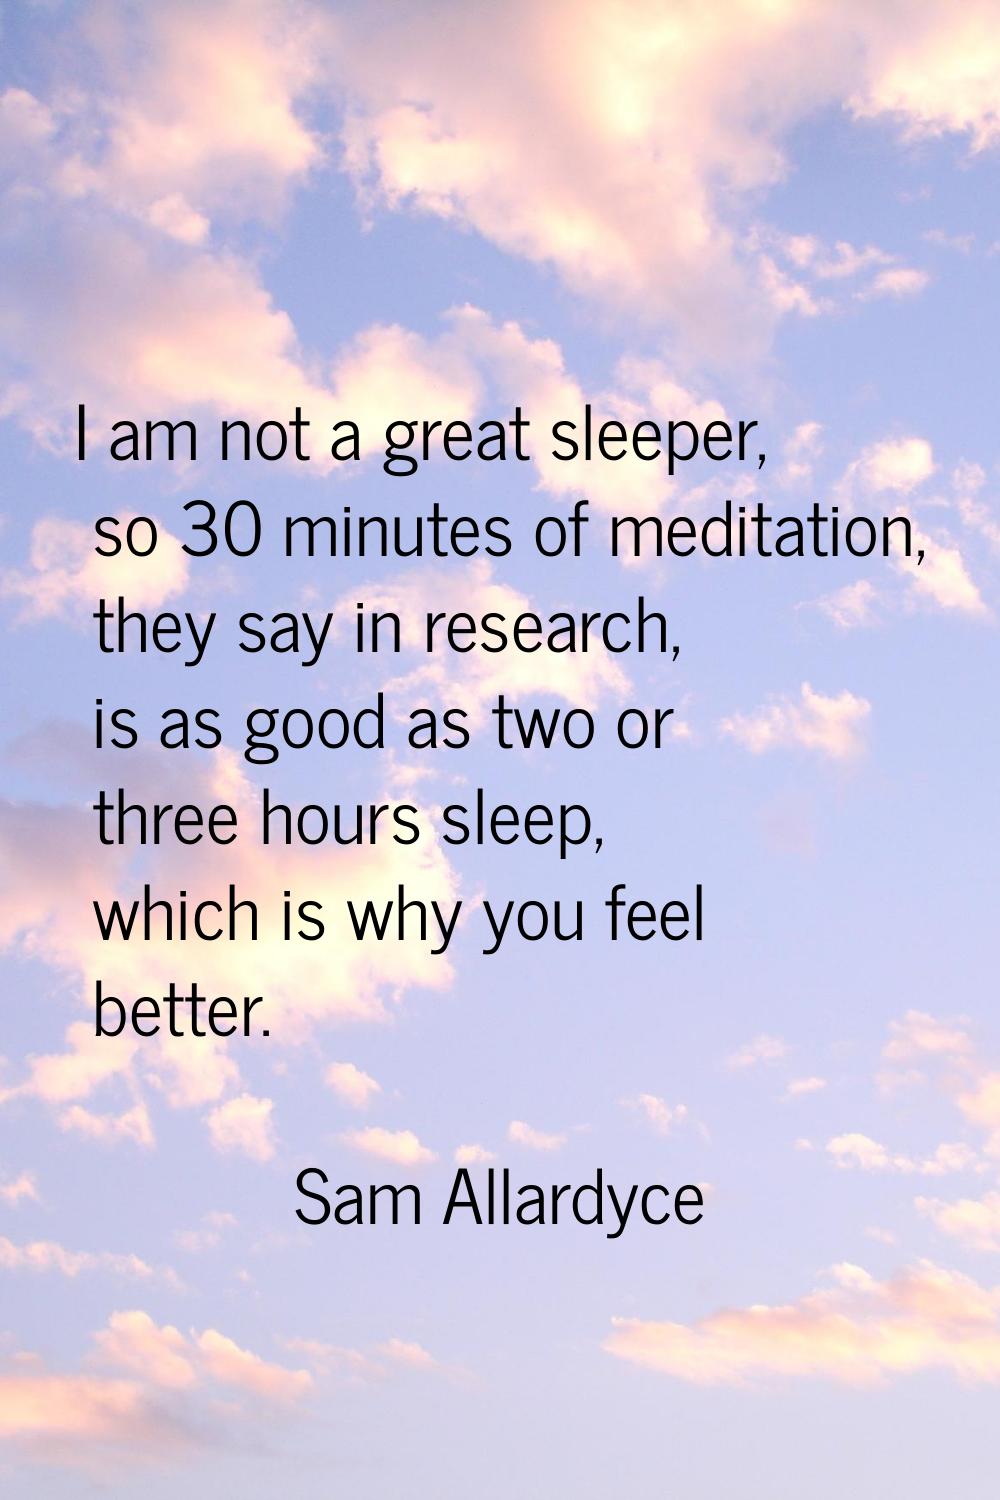 I am not a great sleeper, so 30 minutes of meditation, they say in research, is as good as two or t